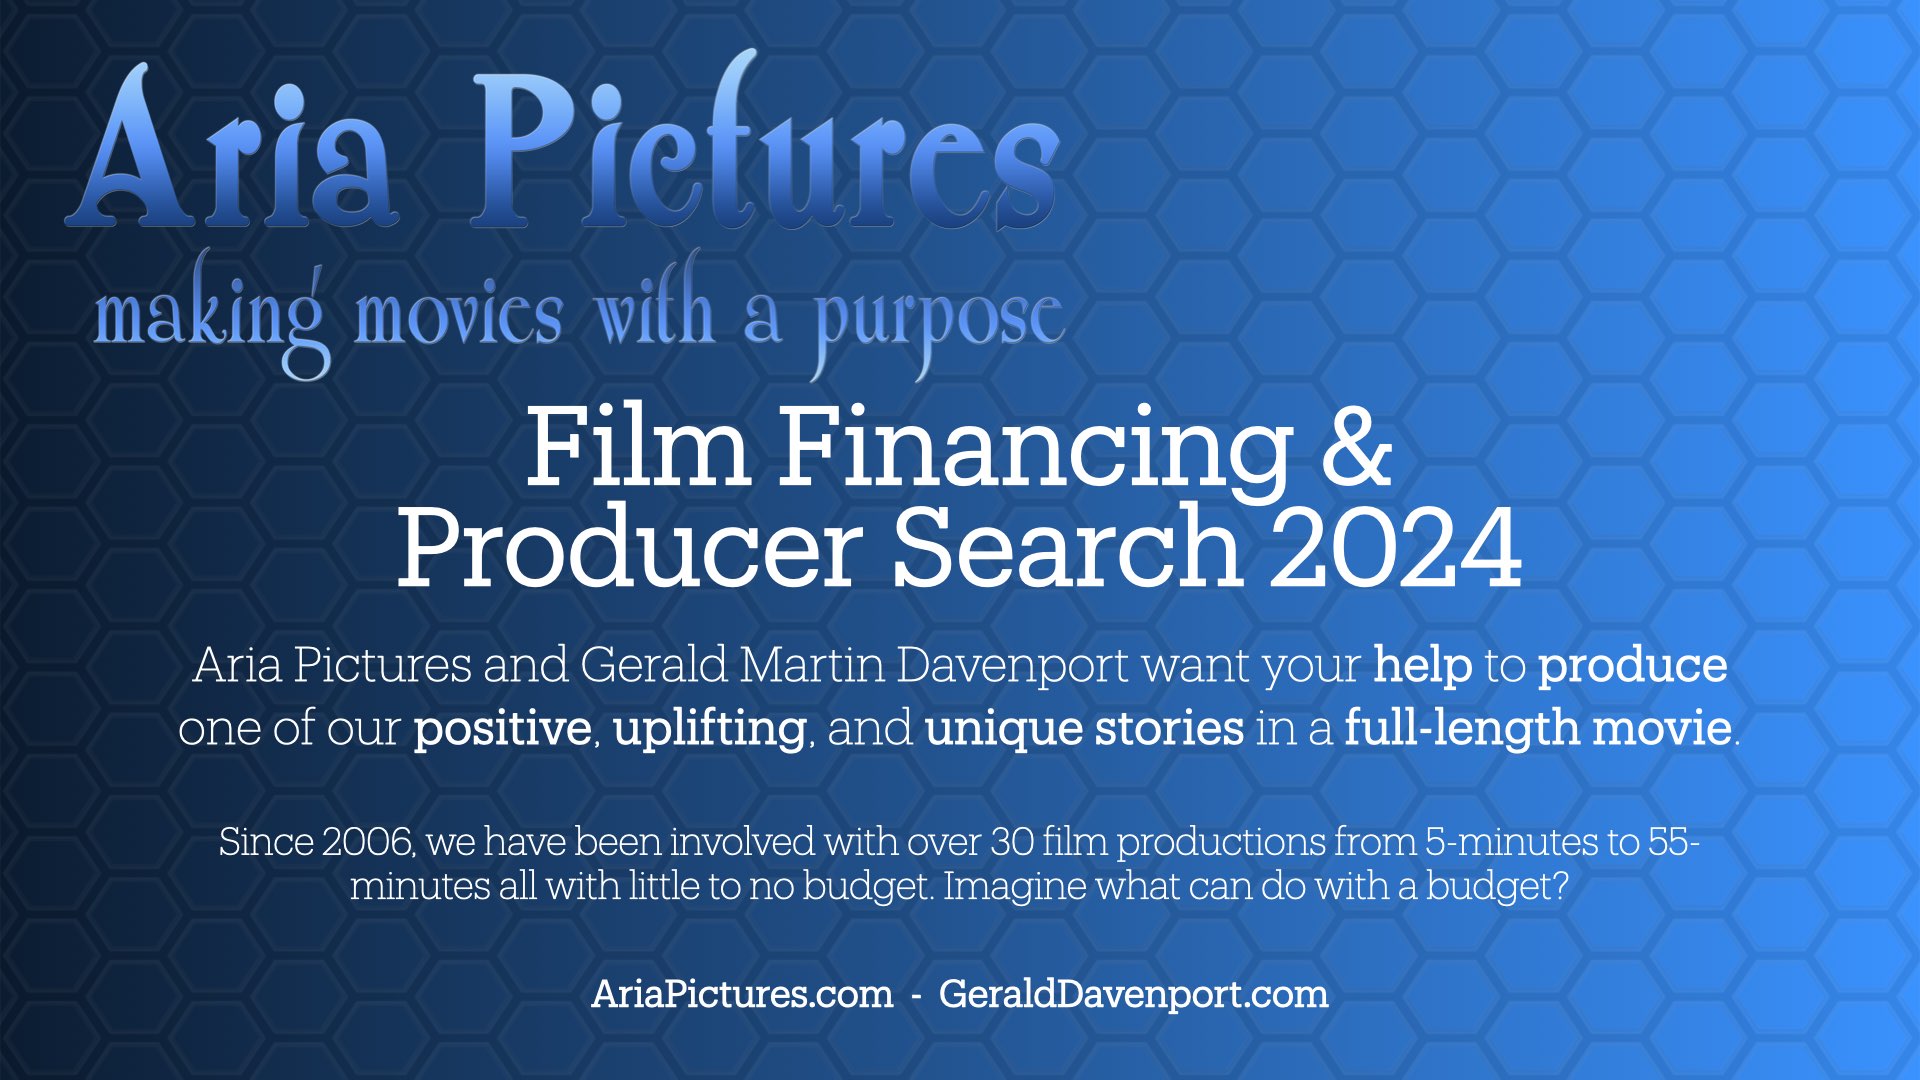 Film Financing - Producer Search 2024. We want your help to produce a full-length movie.